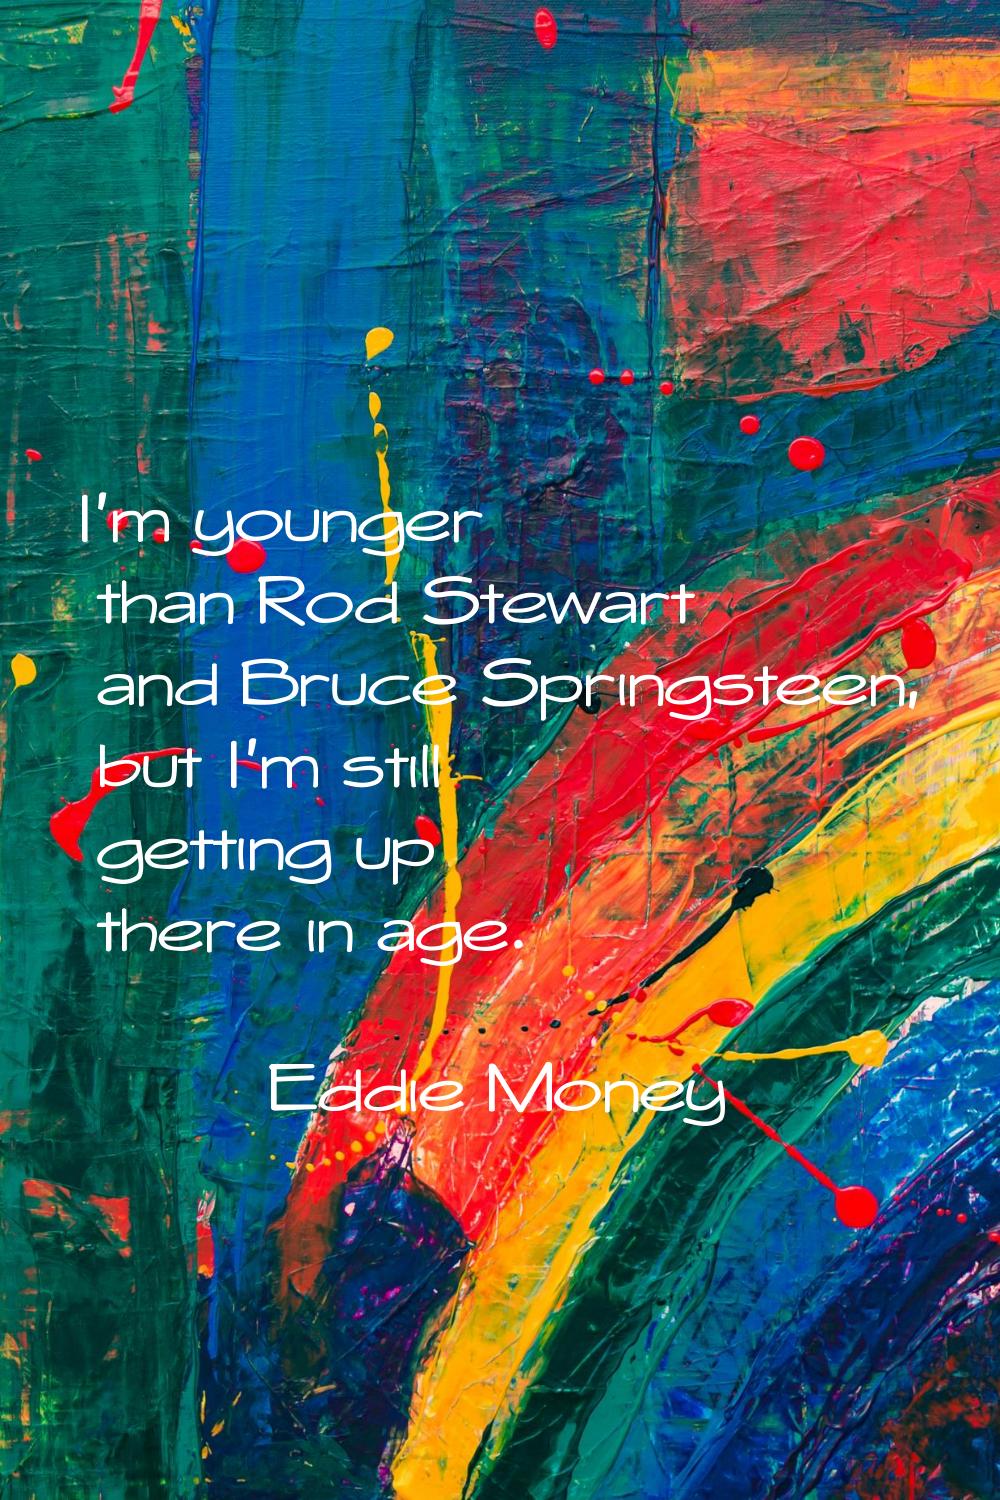 I'm younger than Rod Stewart and Bruce Springsteen, but I'm still getting up there in age.